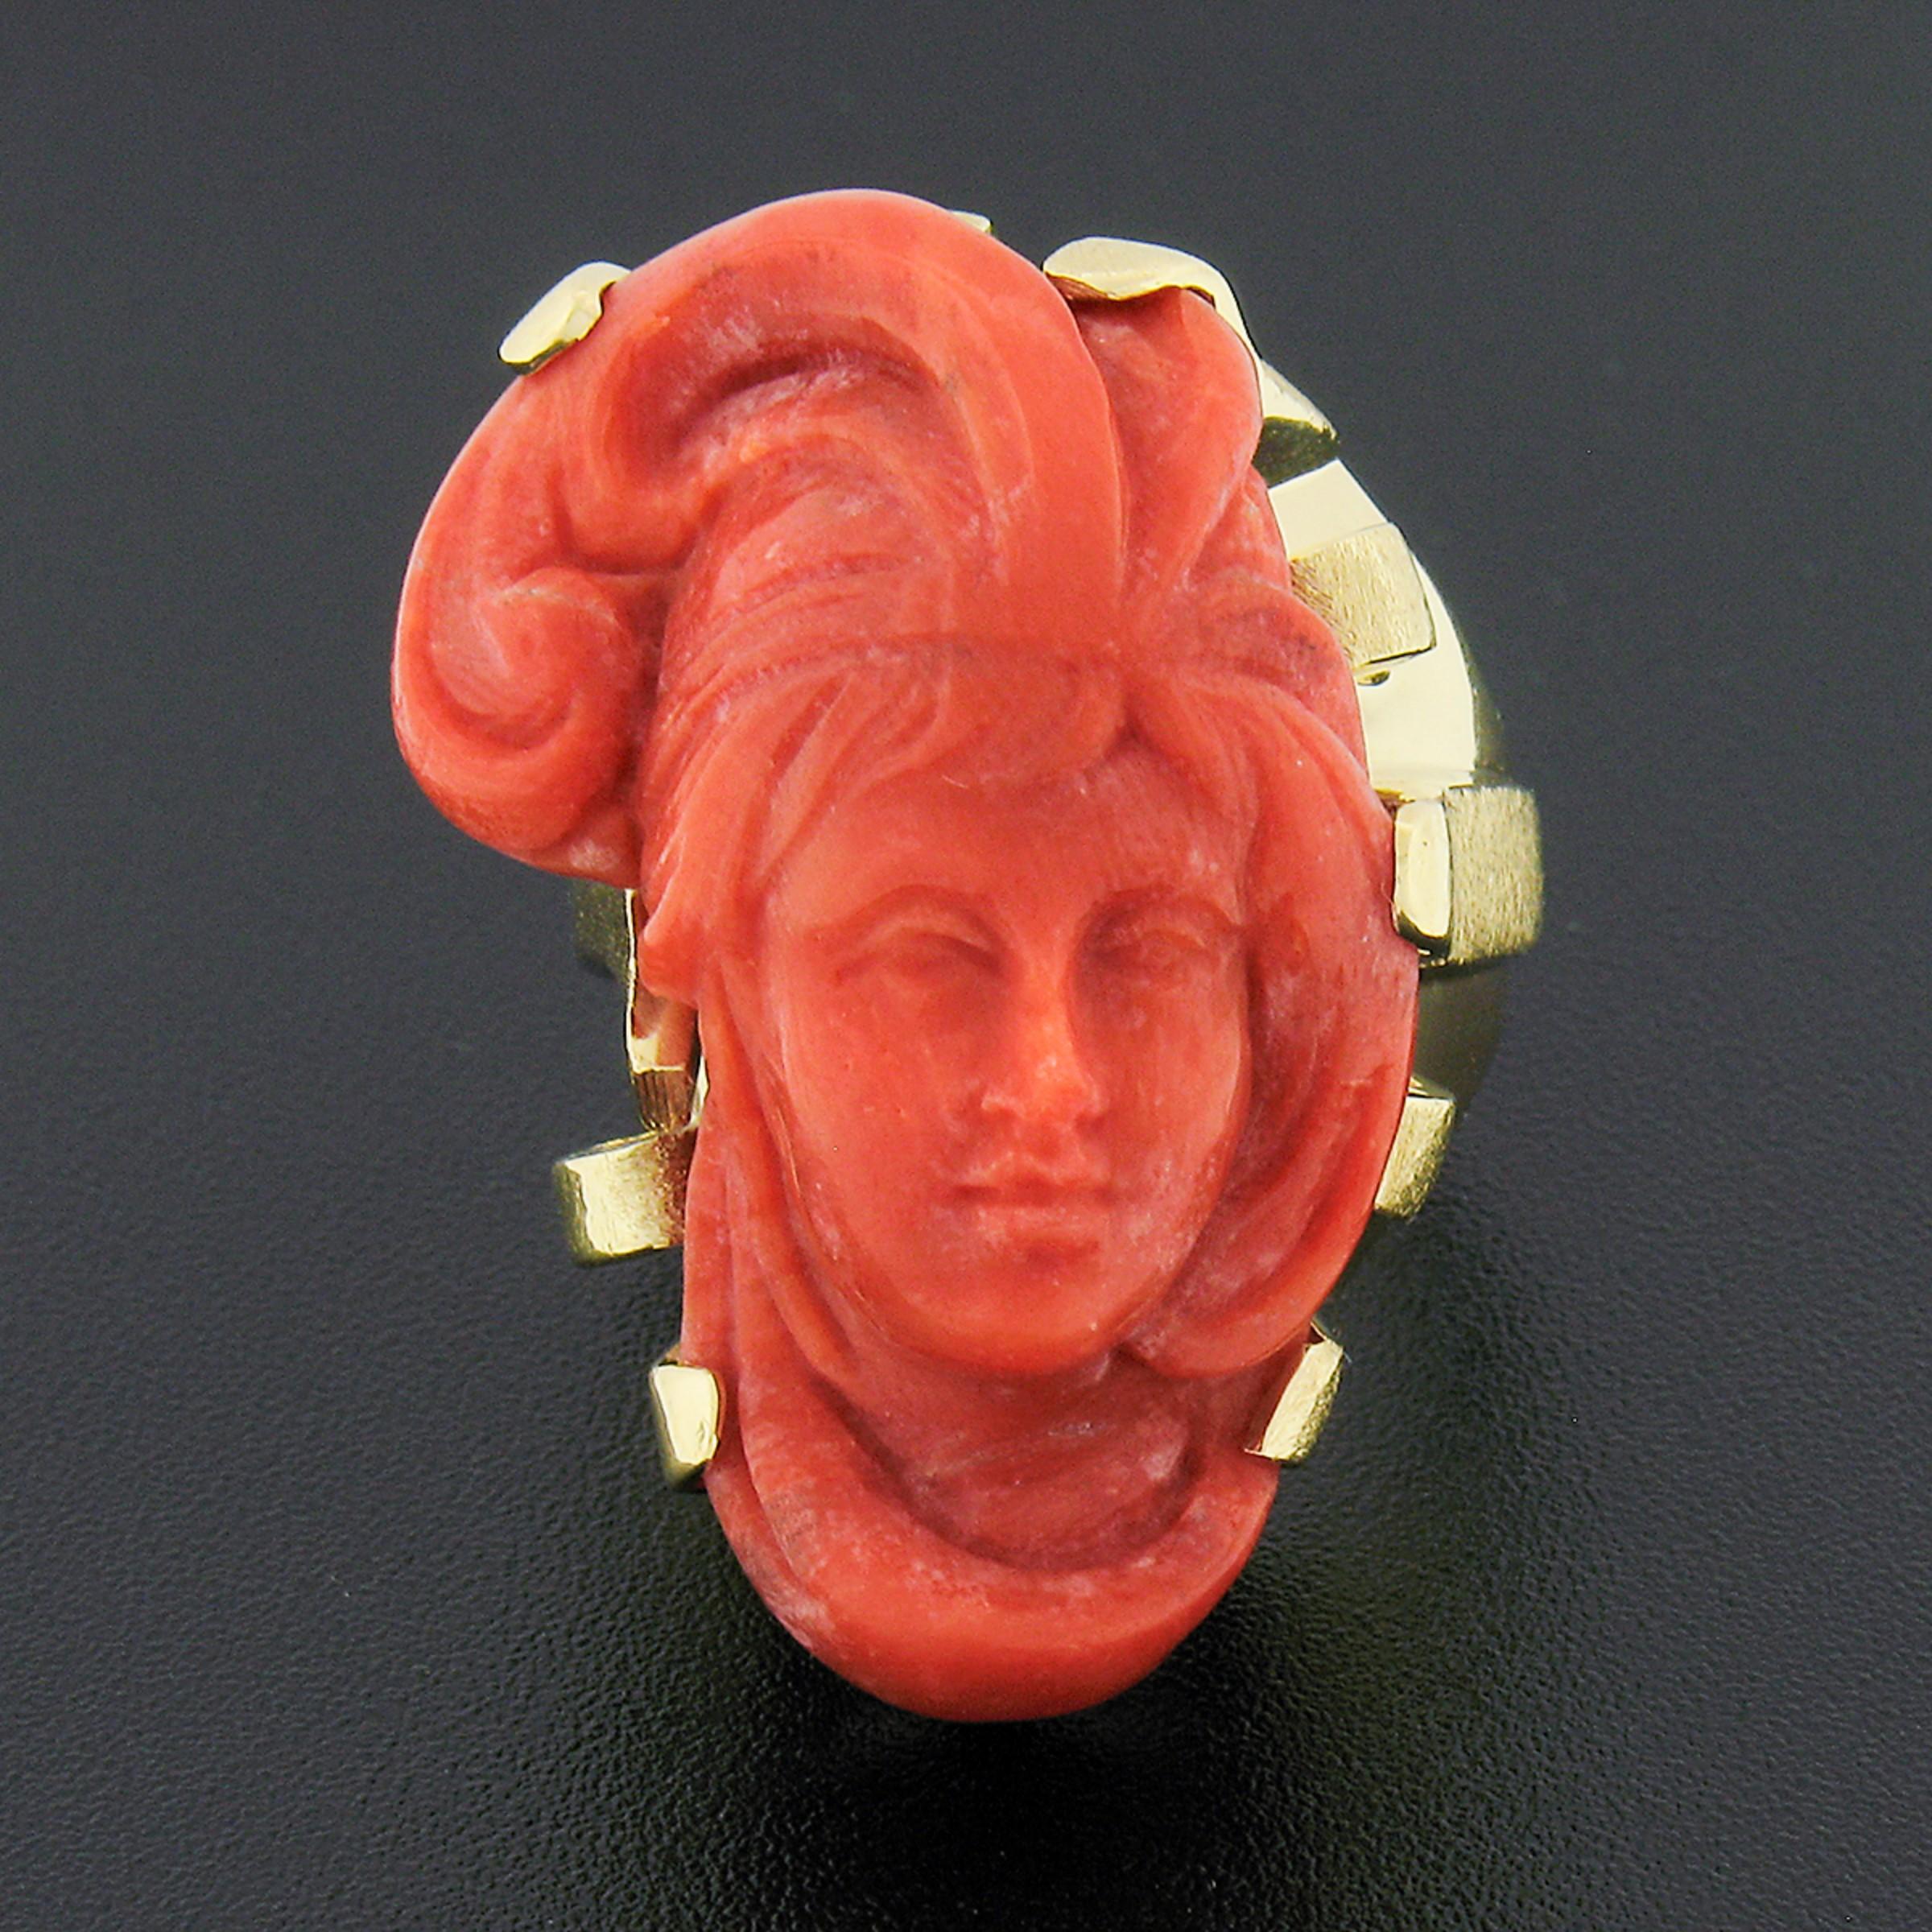 This large, unique, and very well-made vintage ring was crafted from solid 14k yellow gold and features a GIA certified natural coral neatly set at the top. The large coral is a reddish-orange color and is masterfully carved into a portrait of a